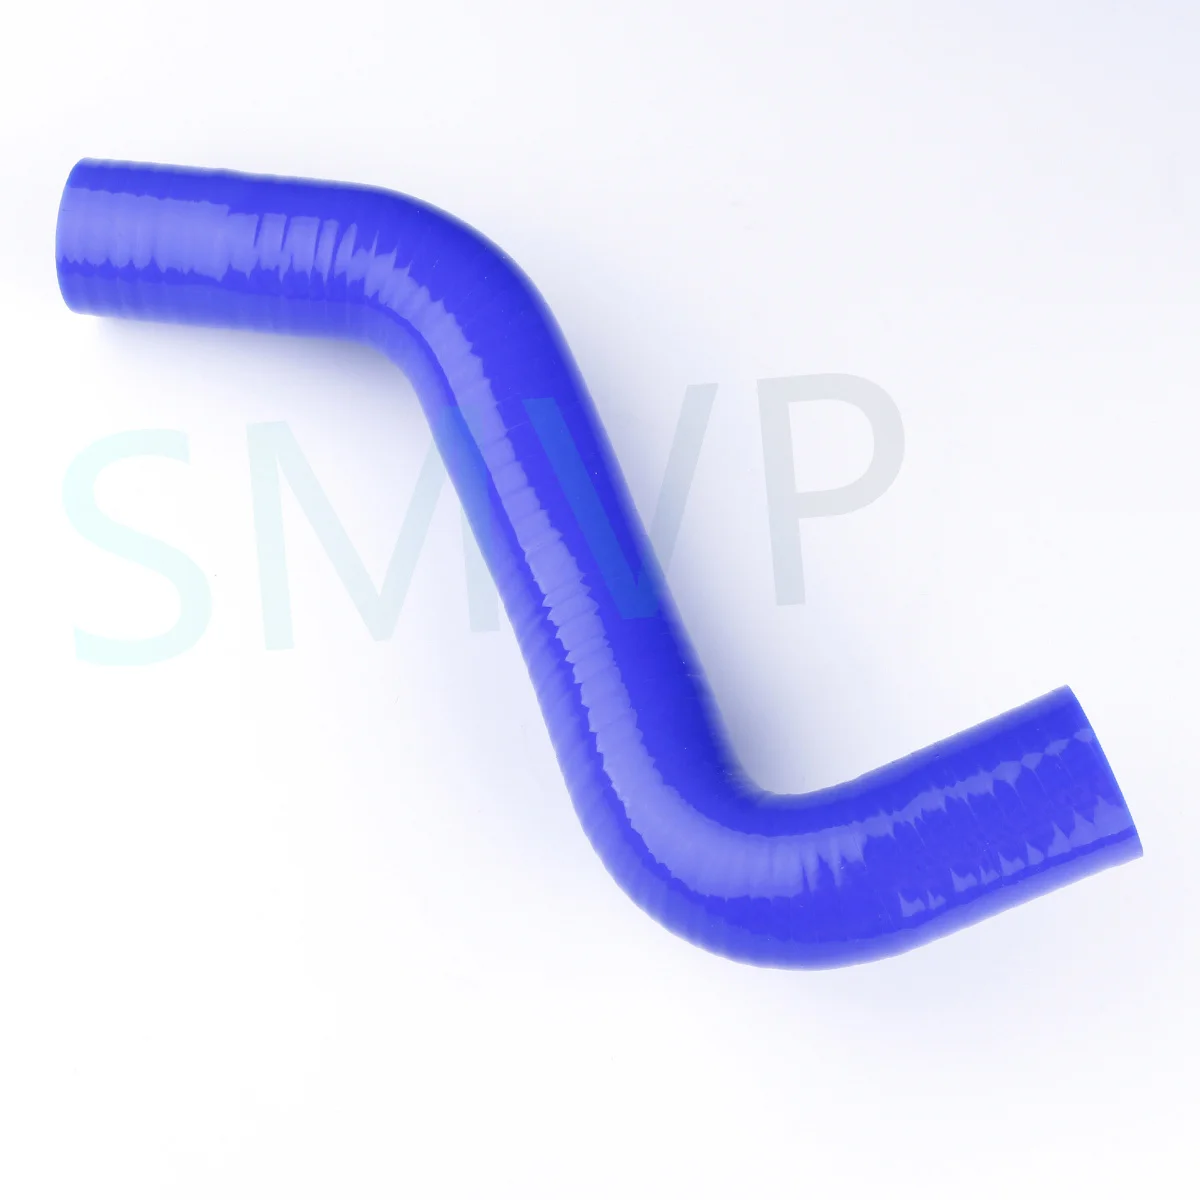 2PCS Silicone Radiator Hose For 1997-2000 Honda Accord SiR/SiR-T F20B CF4 Euro-R CL1 Replacement Performance Parts 1998 1999 images - 6